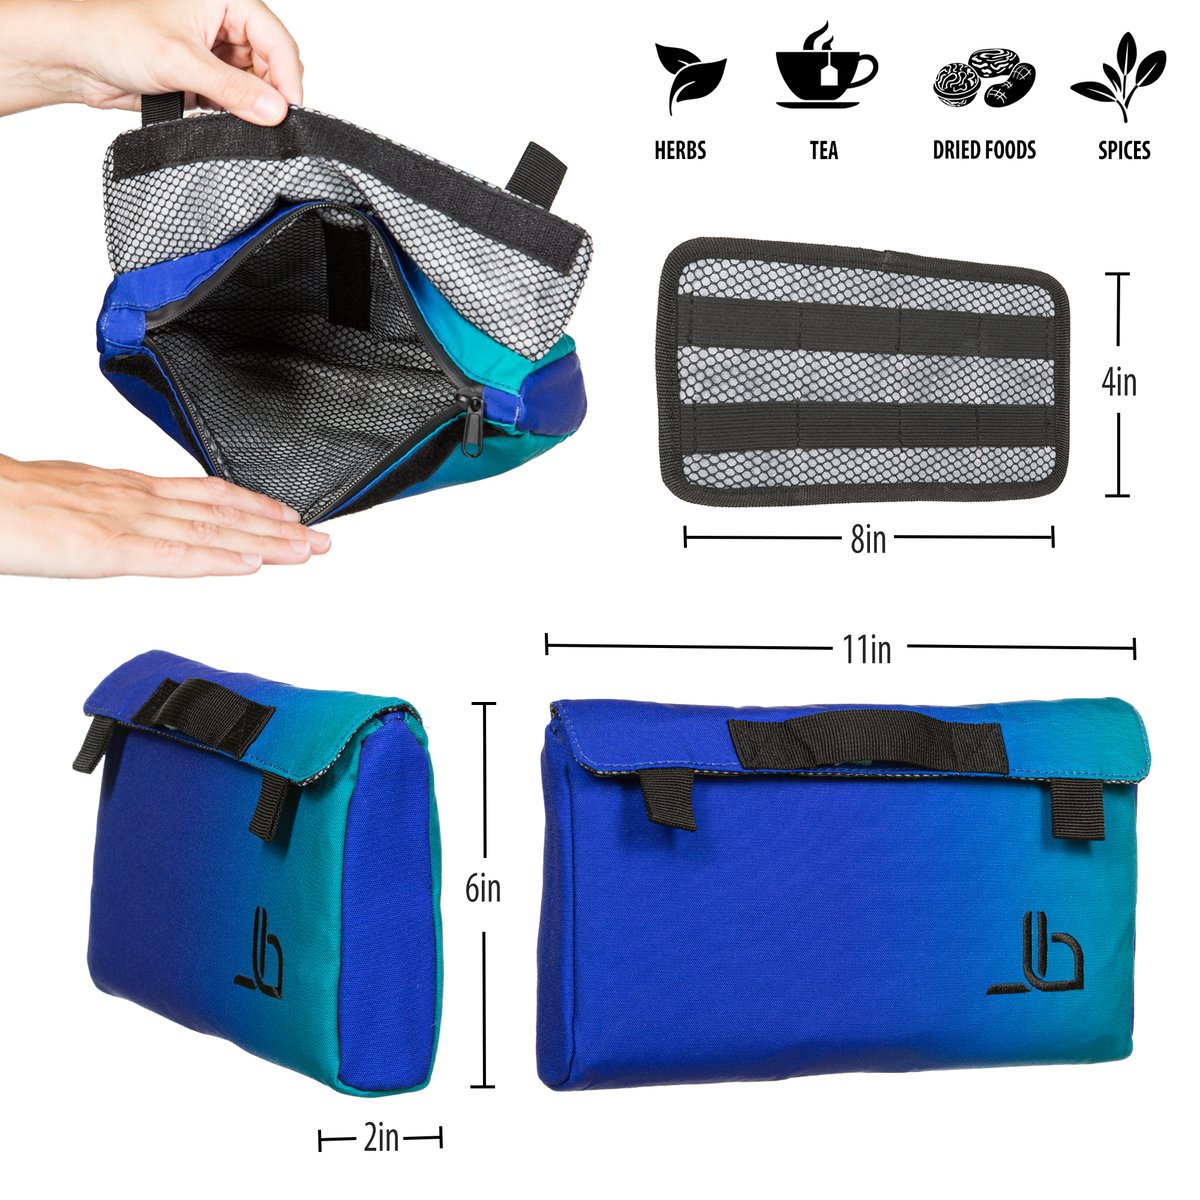 Smell Proof Bag - Eliminates Odor in Carbon Lined Airtight Bag